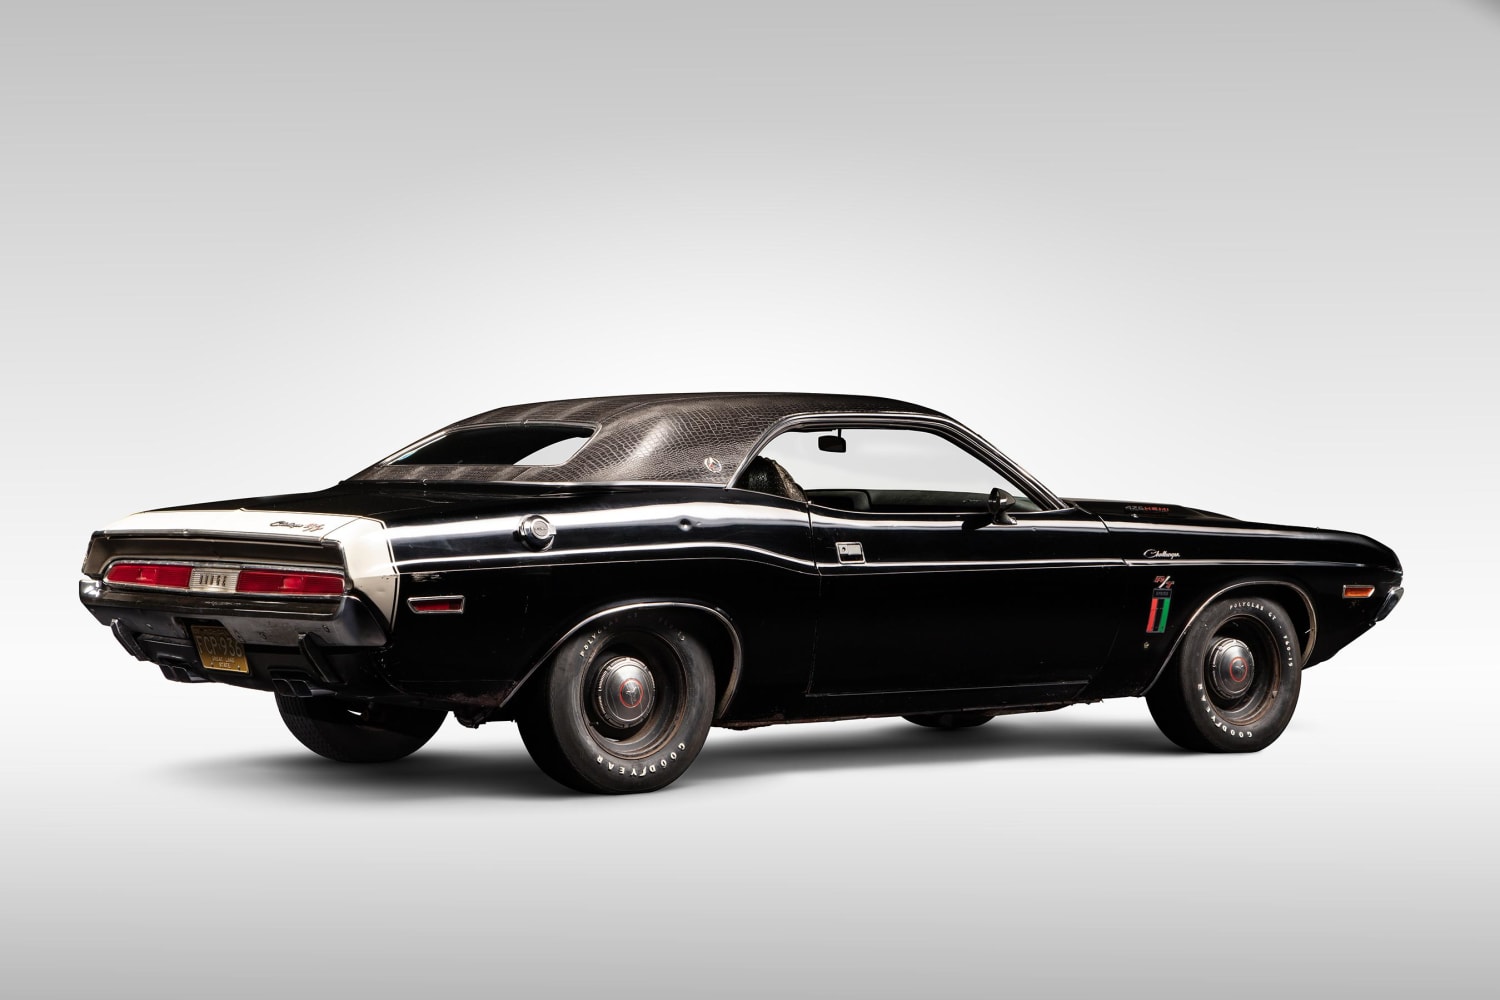 The 1970 Dodge Challenger R/T 426 "Black Ghost" 1 of 33. When you are a police officer in the day but want win all the Detroit Drag races in the night, and dissapear.